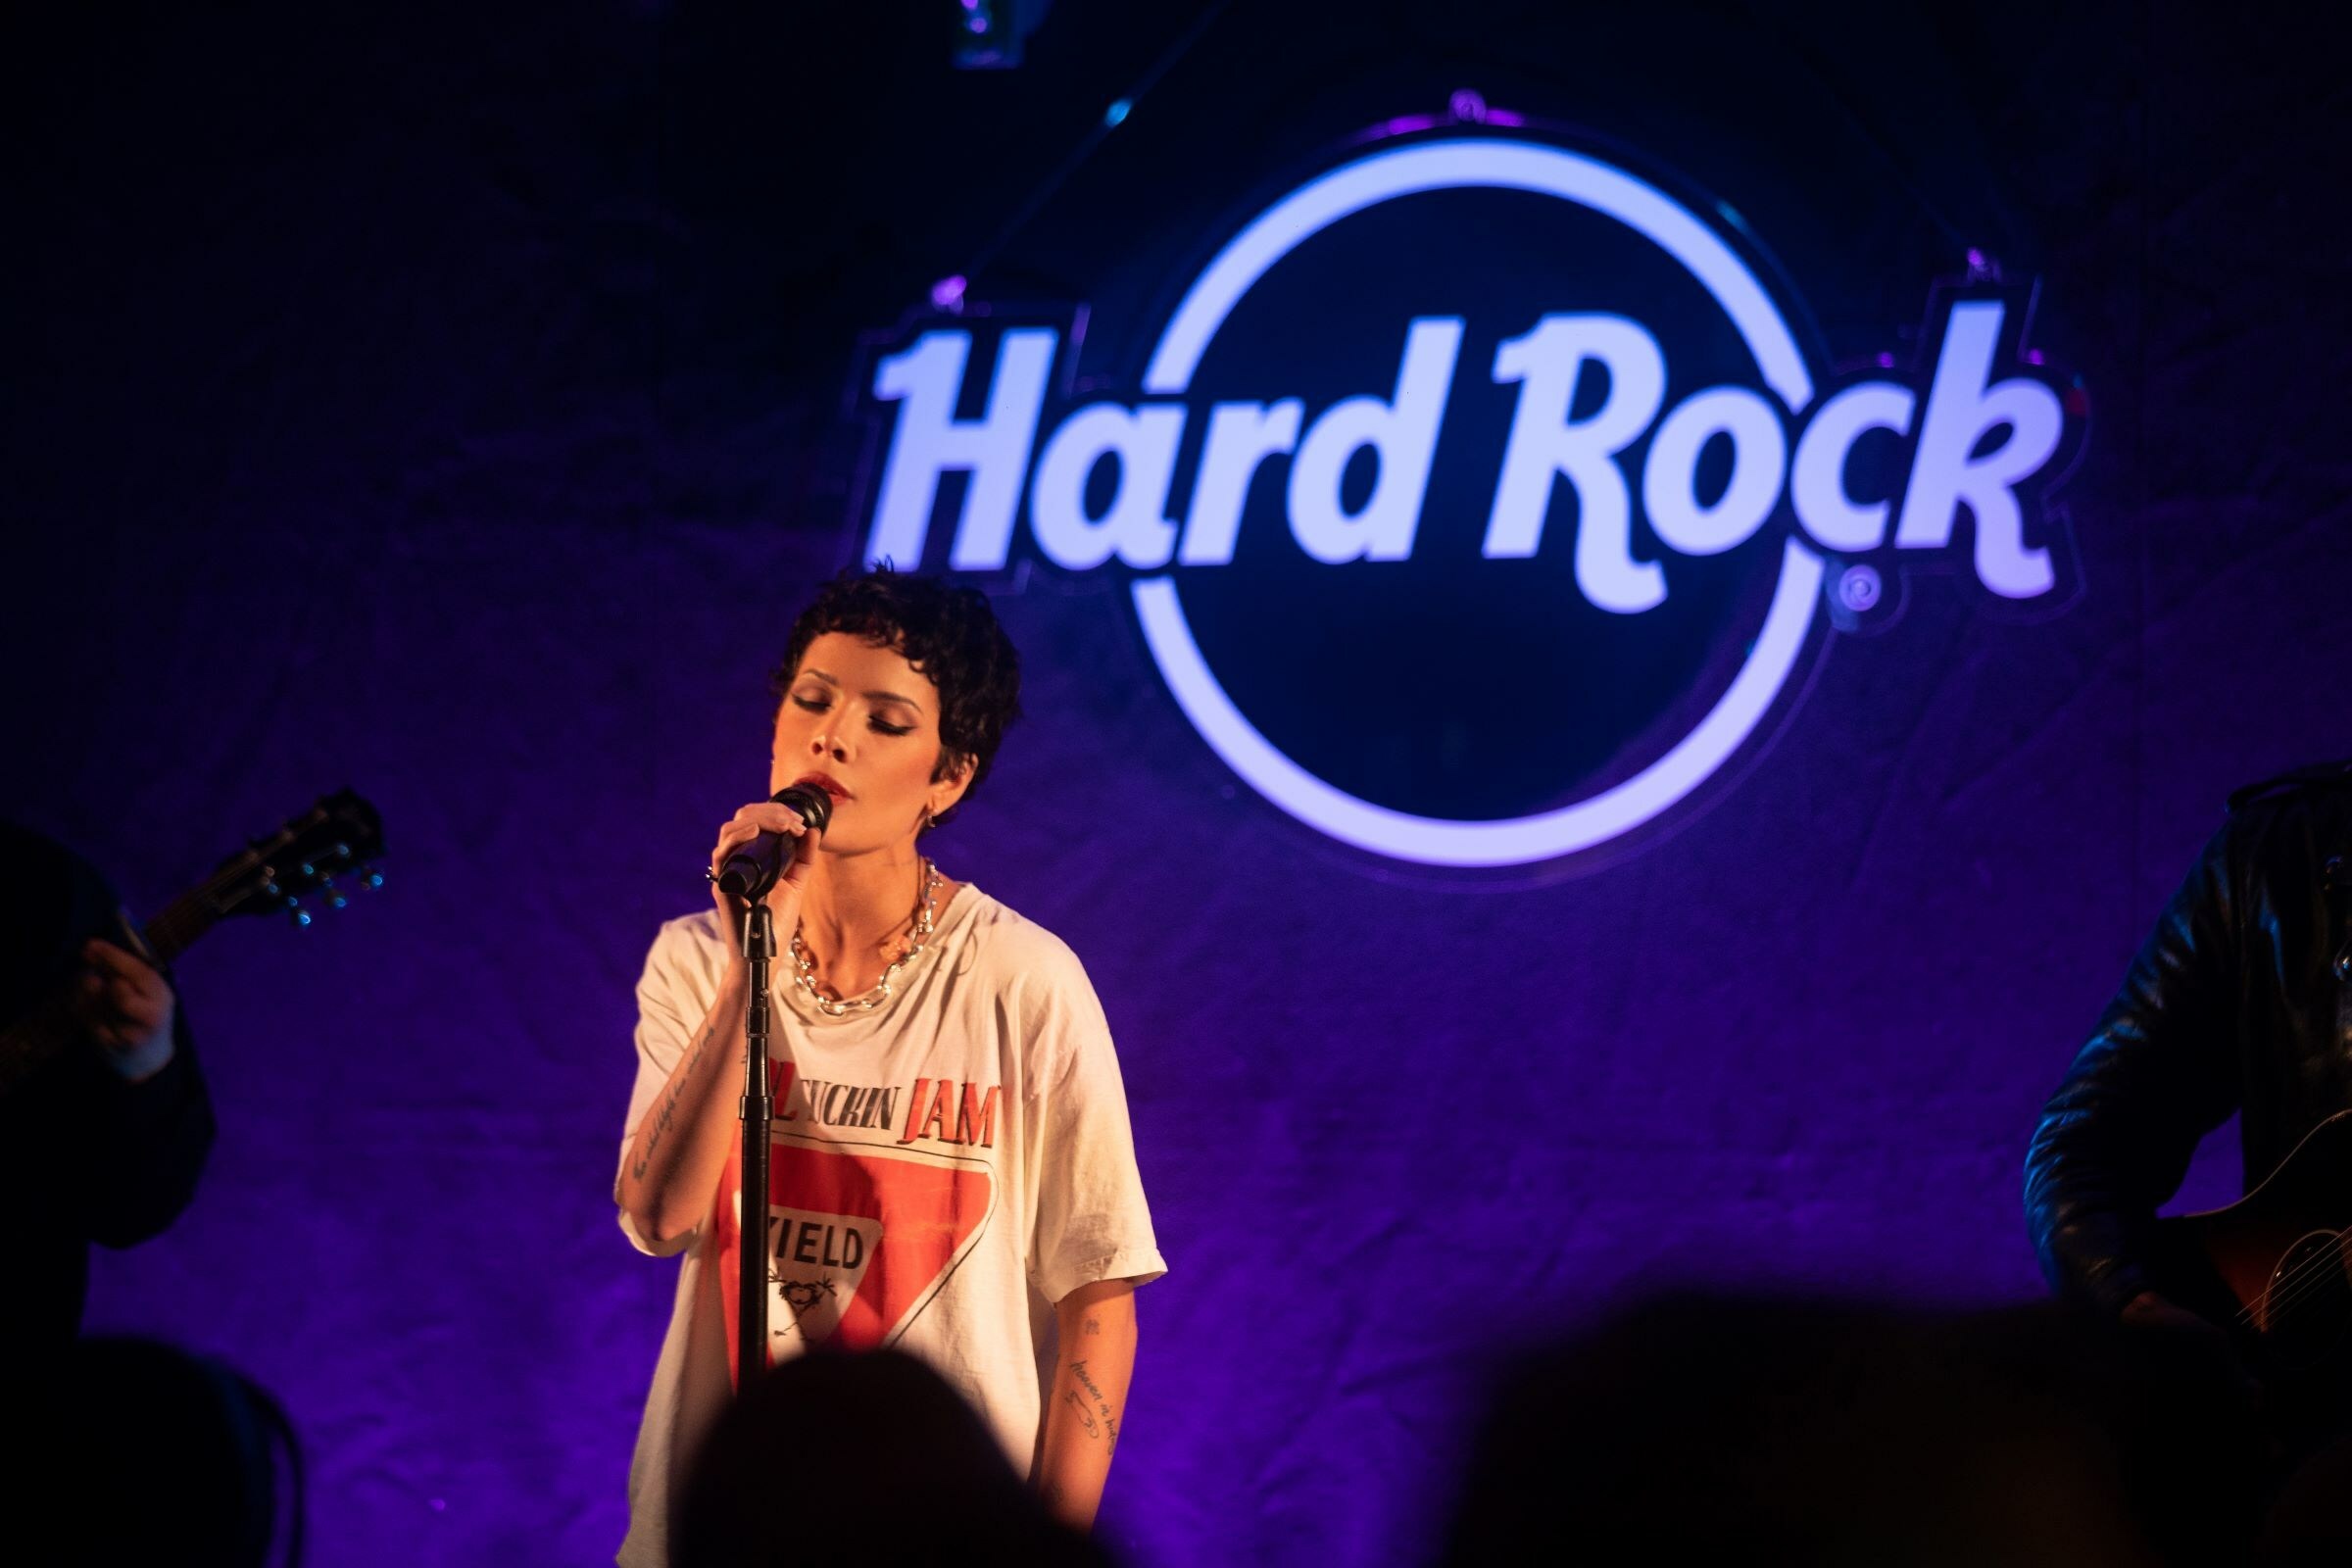 Hard Rock International “Love Out Loud” partner Halsey kicked off Pride Month at Hard Rock Cafe London Old Park Lane with a VIP performance and memorabilia donation to Hard Rock’s celebrated collection. (Photo Credit: Jasmine Safaeian)